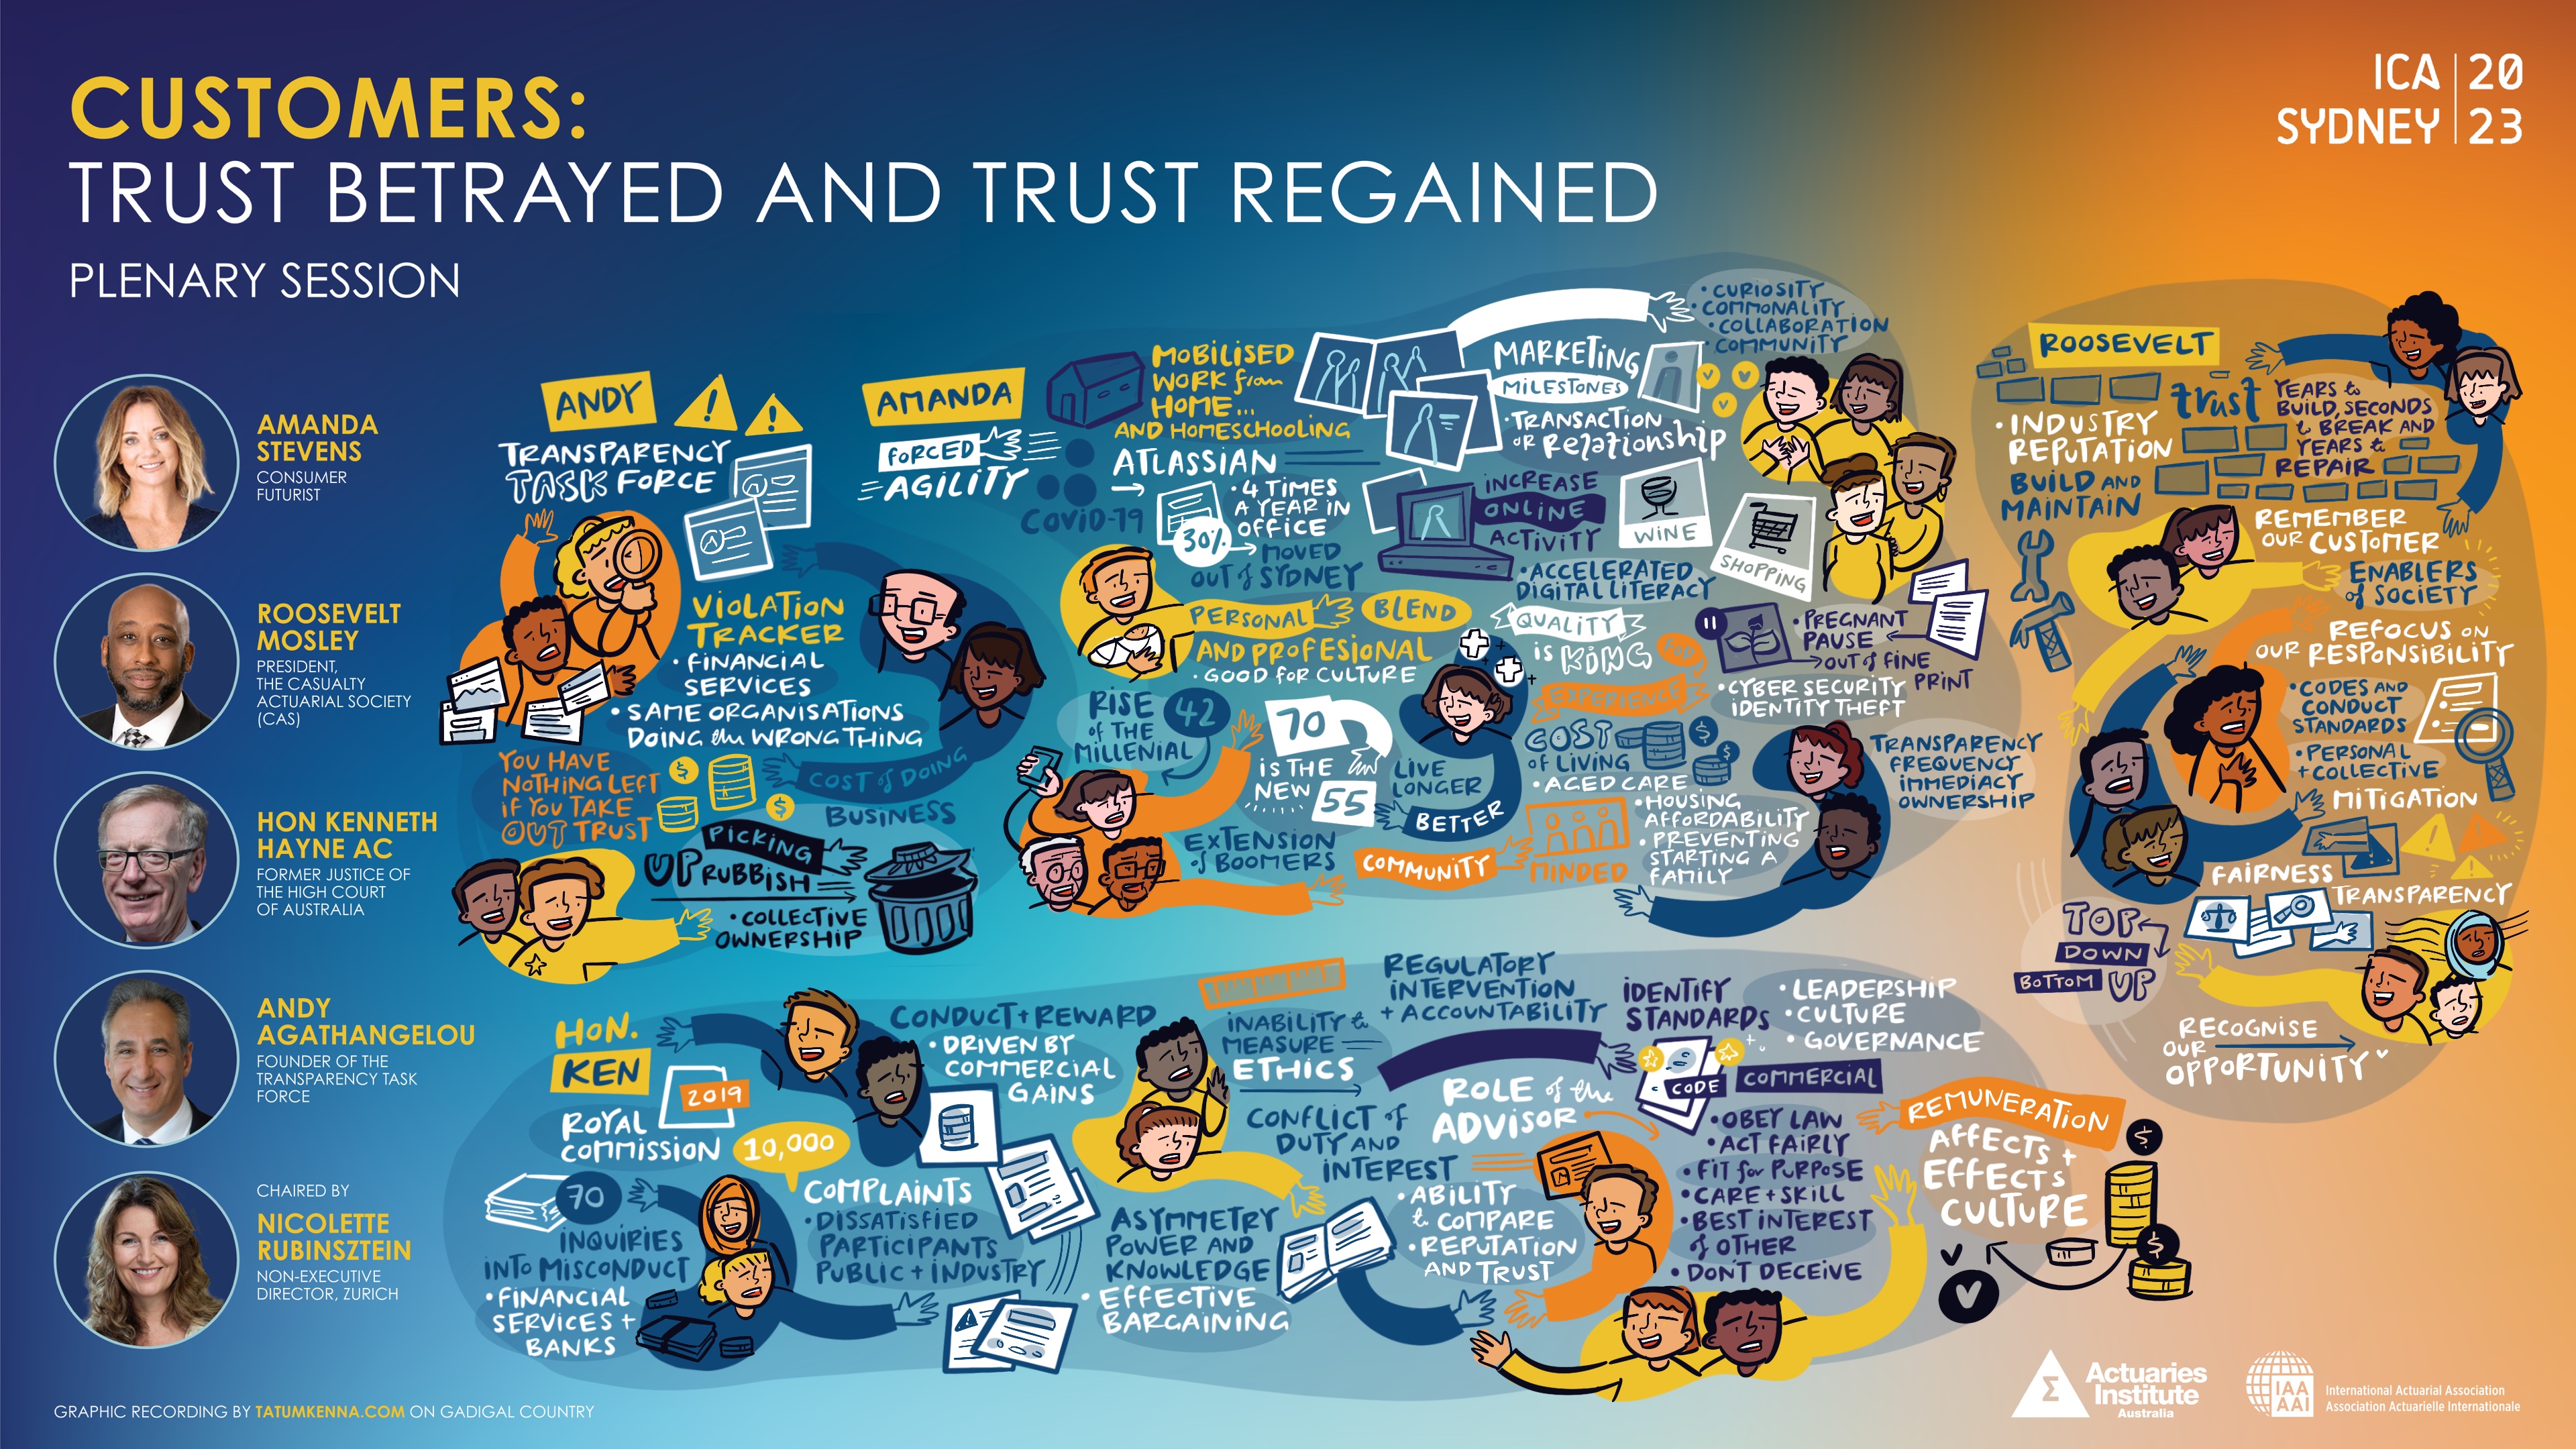 Customers_Trust Betrayed and Trust Regained_Image